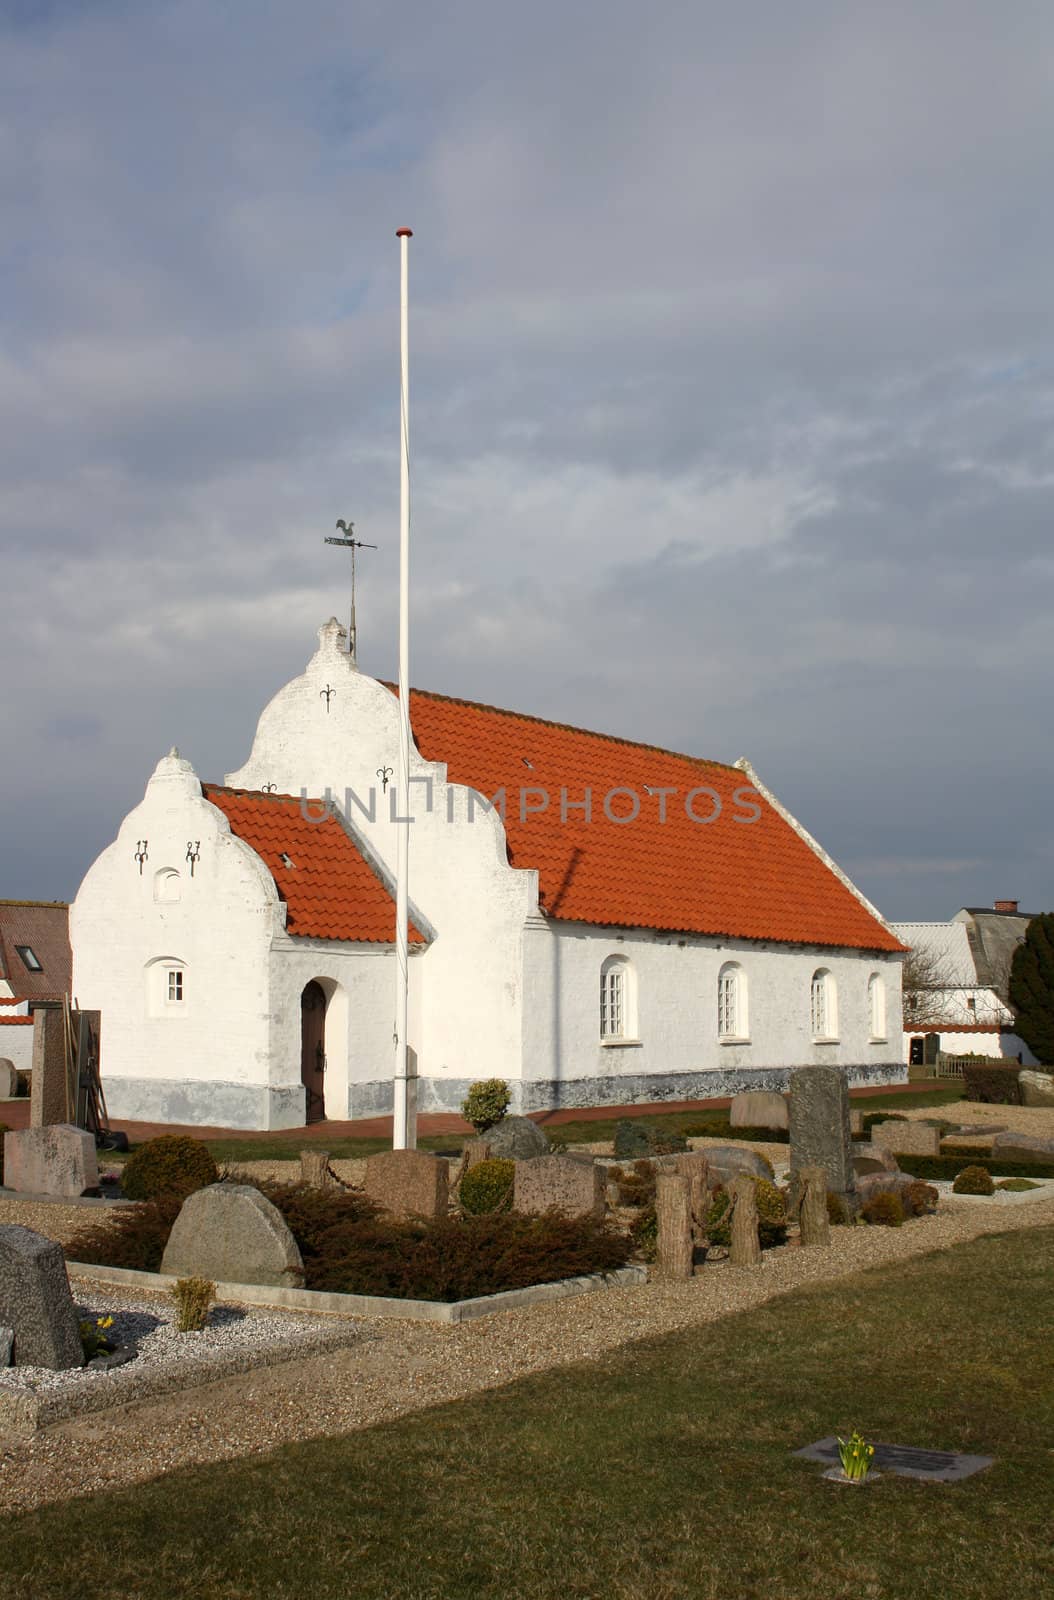 Old church on the Danish island Mandoe/Mandø in South Jutland, built in 1639 and altered in 1727. 3rd April 2010.